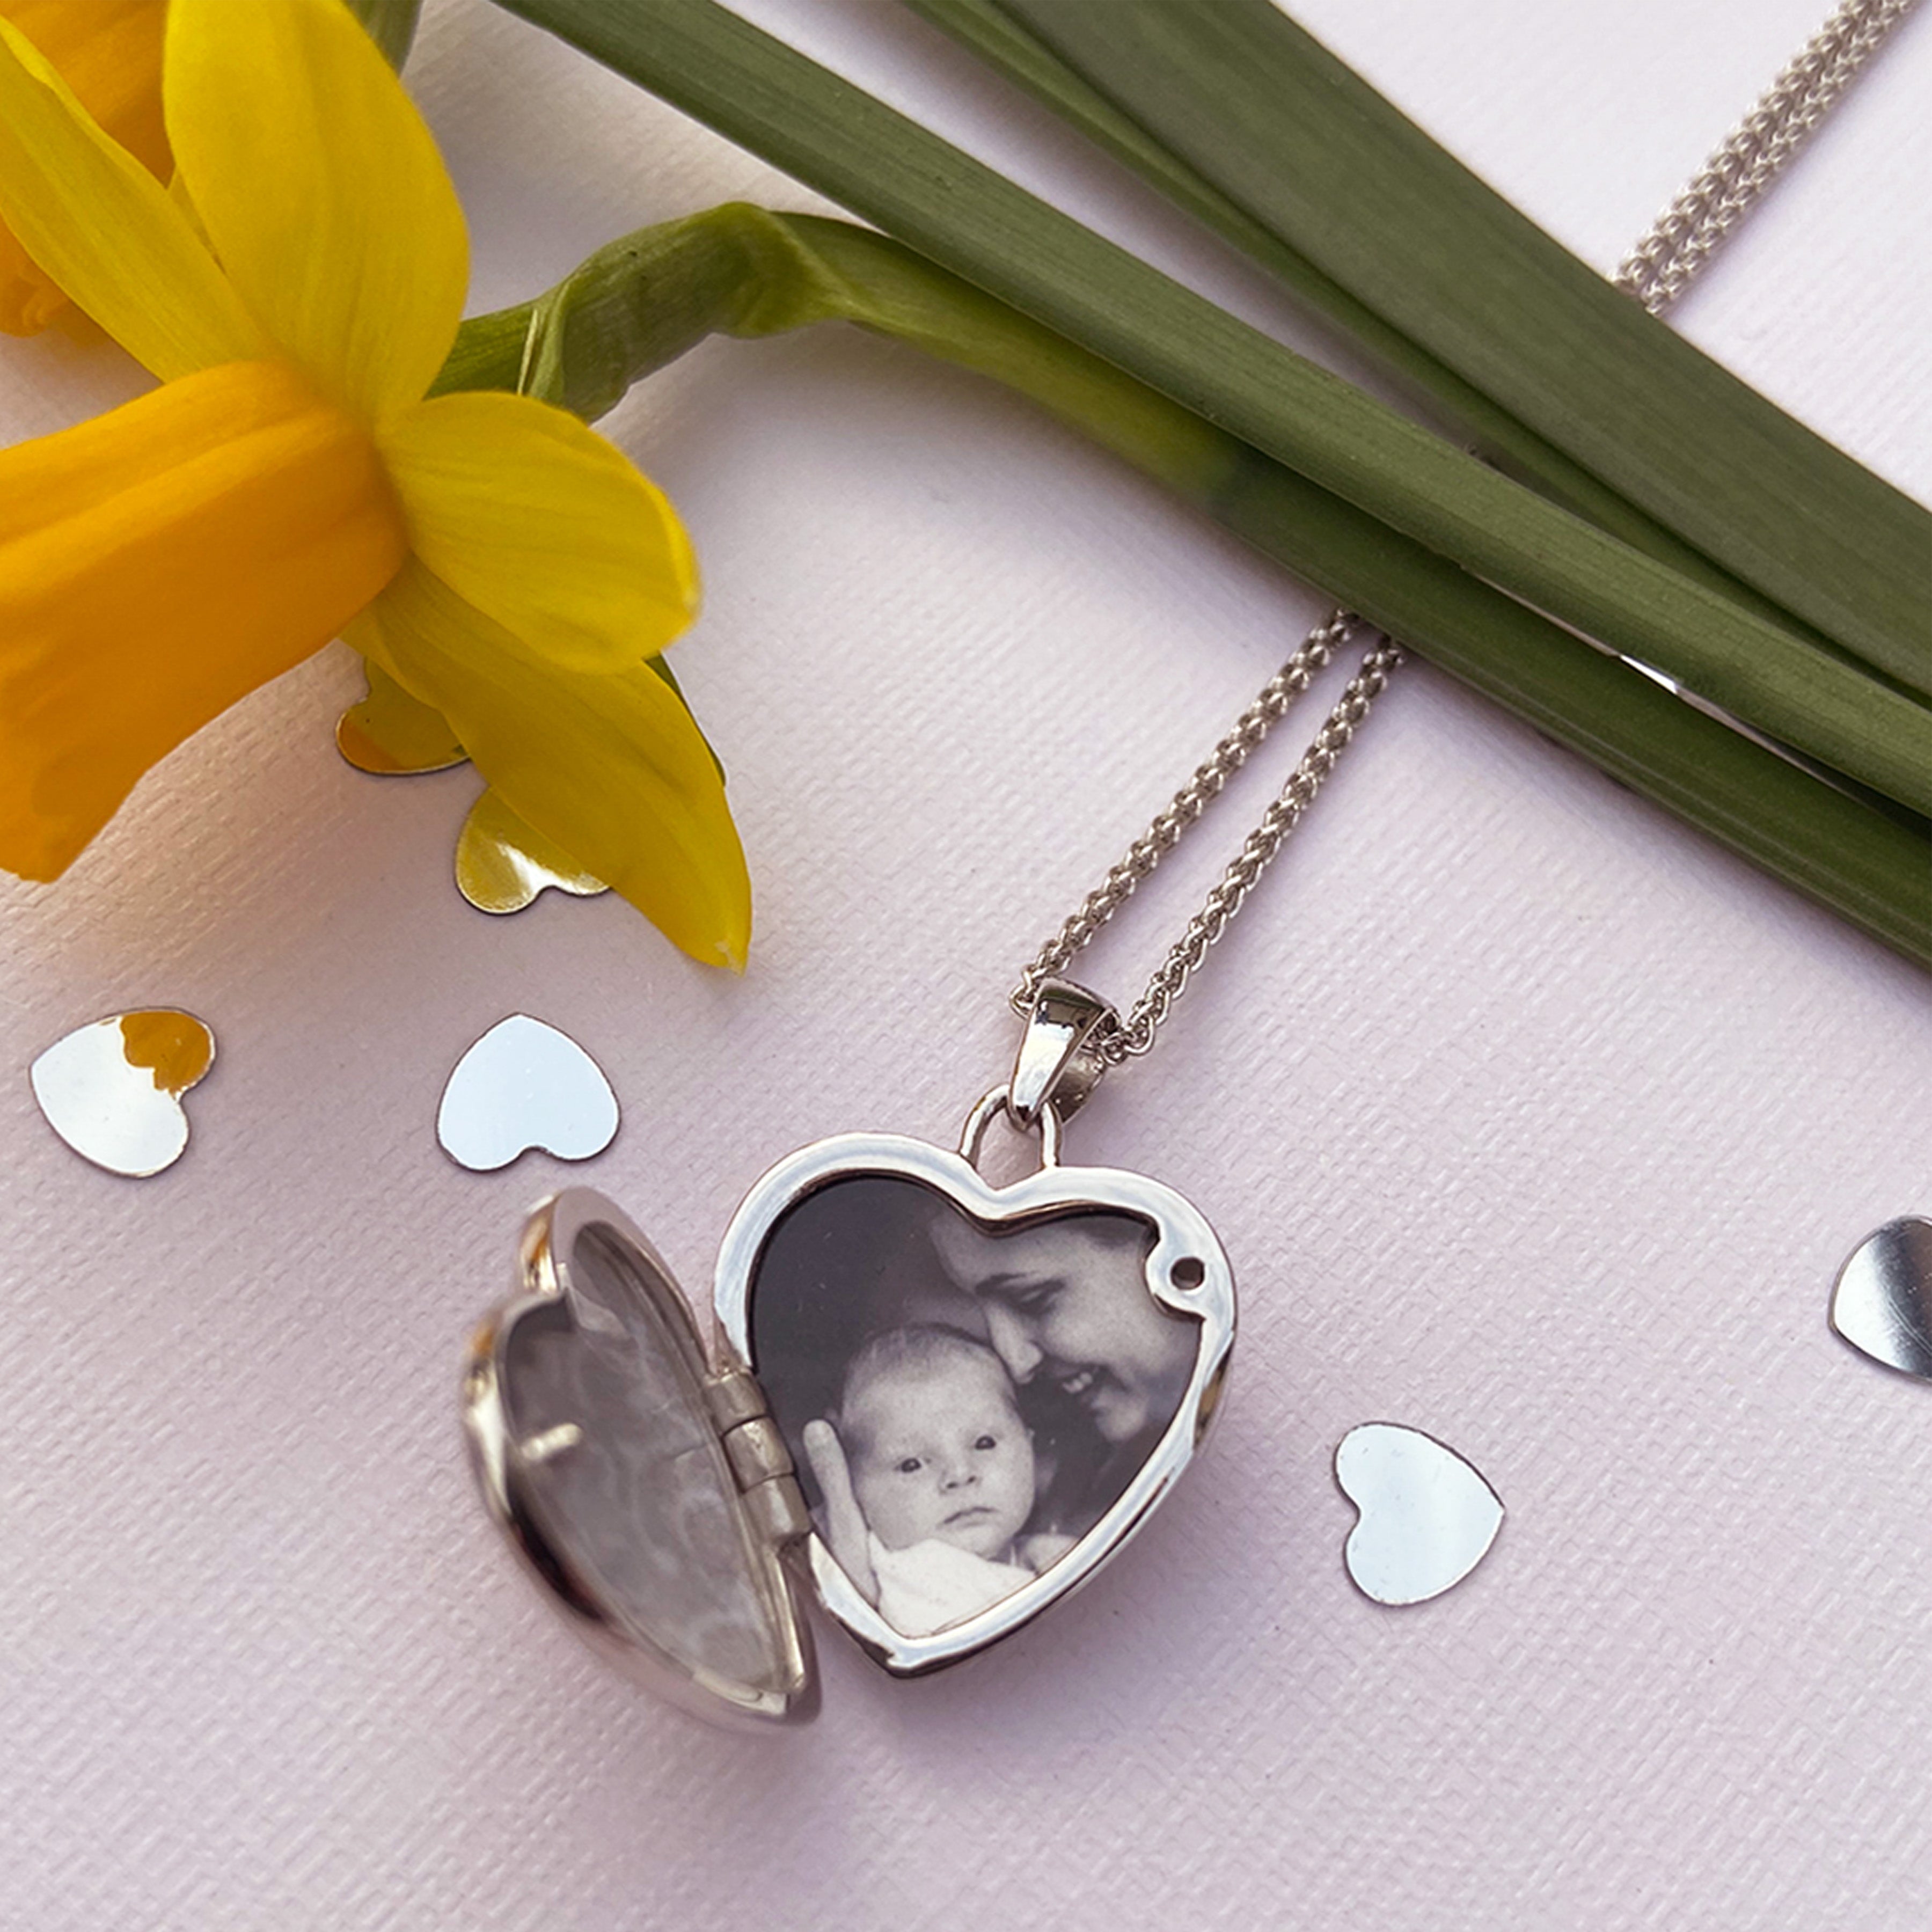 Product title: Hand Polished White Gold Heart, product type: Locket